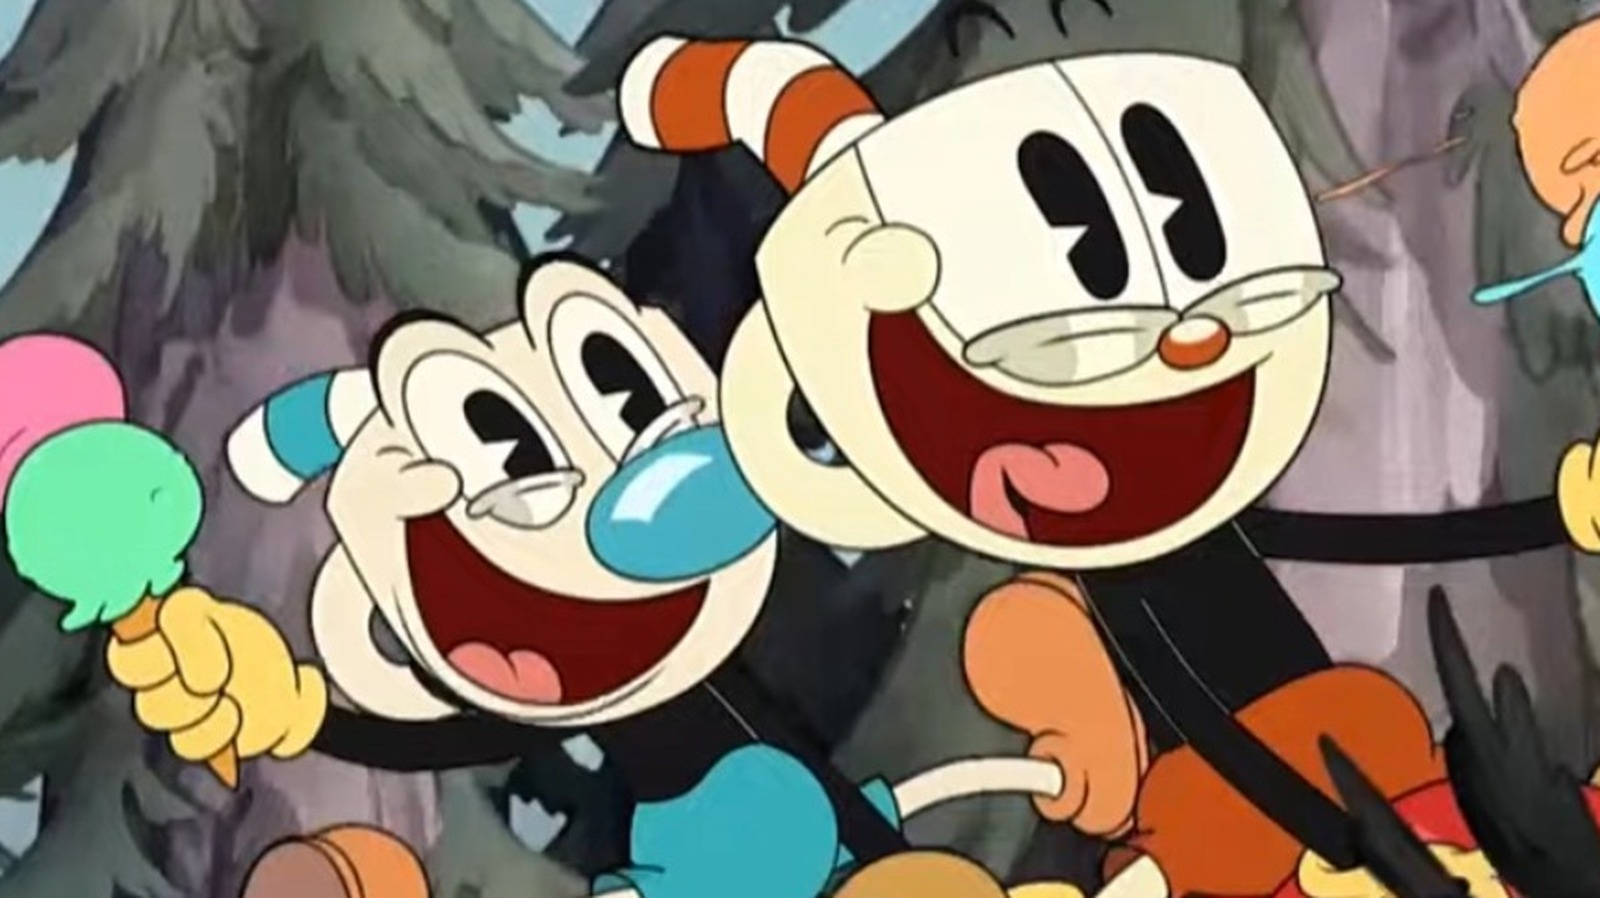 The Cuphead Show but only Ms Chalice: Part II 